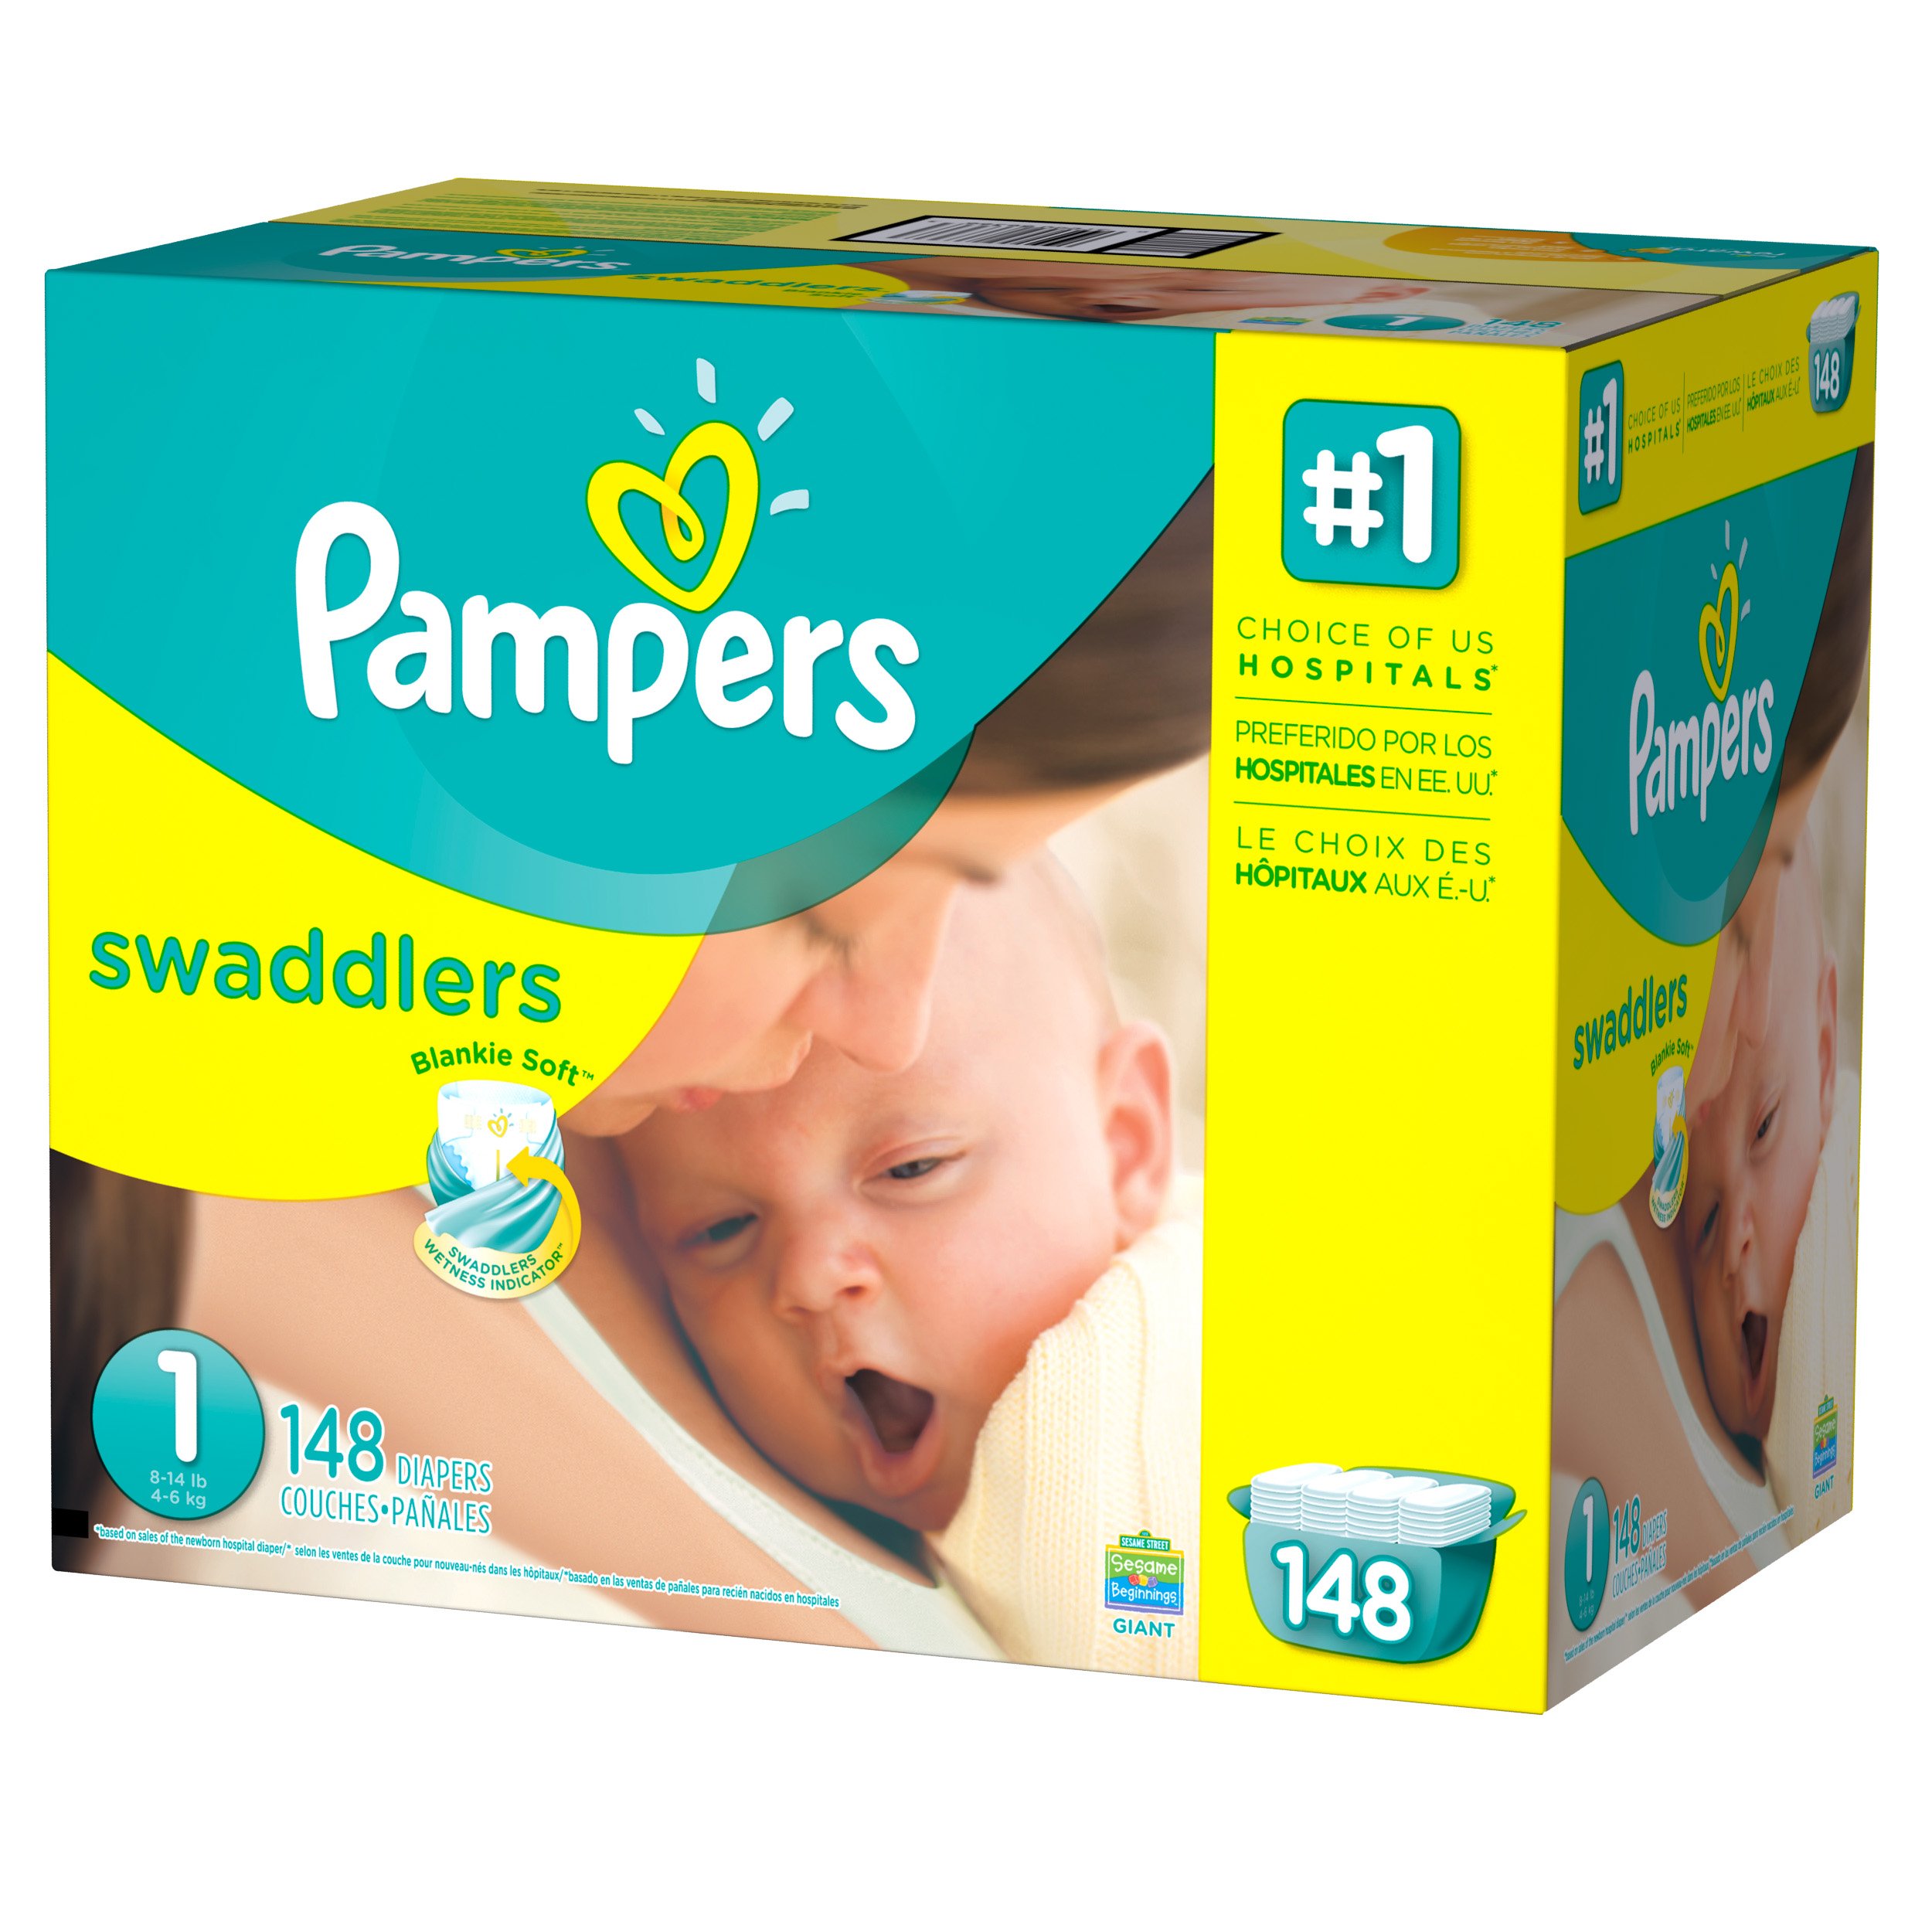 Pampers Swaddlers Newborn Diapers Size 1 148 count